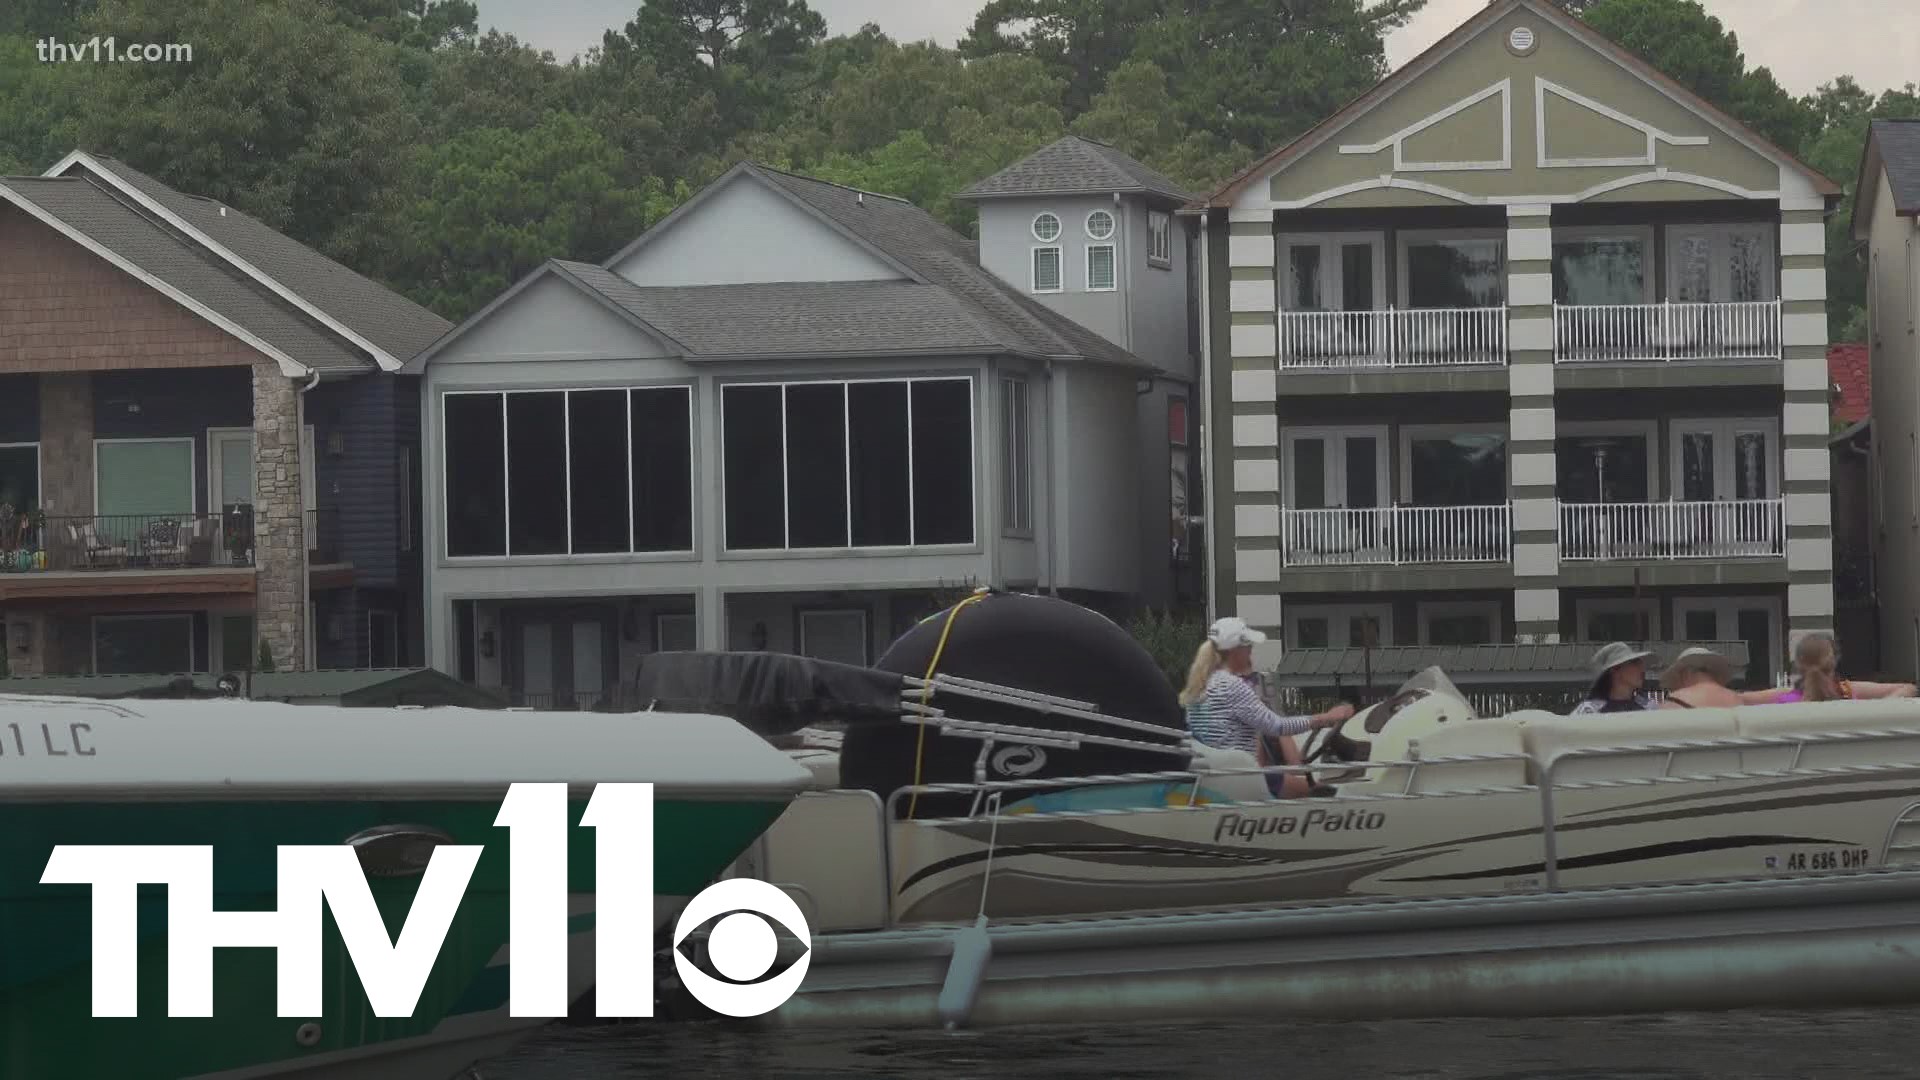 With Independence Day only a couple of days away, many are expected to be on the water. Marinas in Hot Springs are prepping for one of the year's busiest holidays.